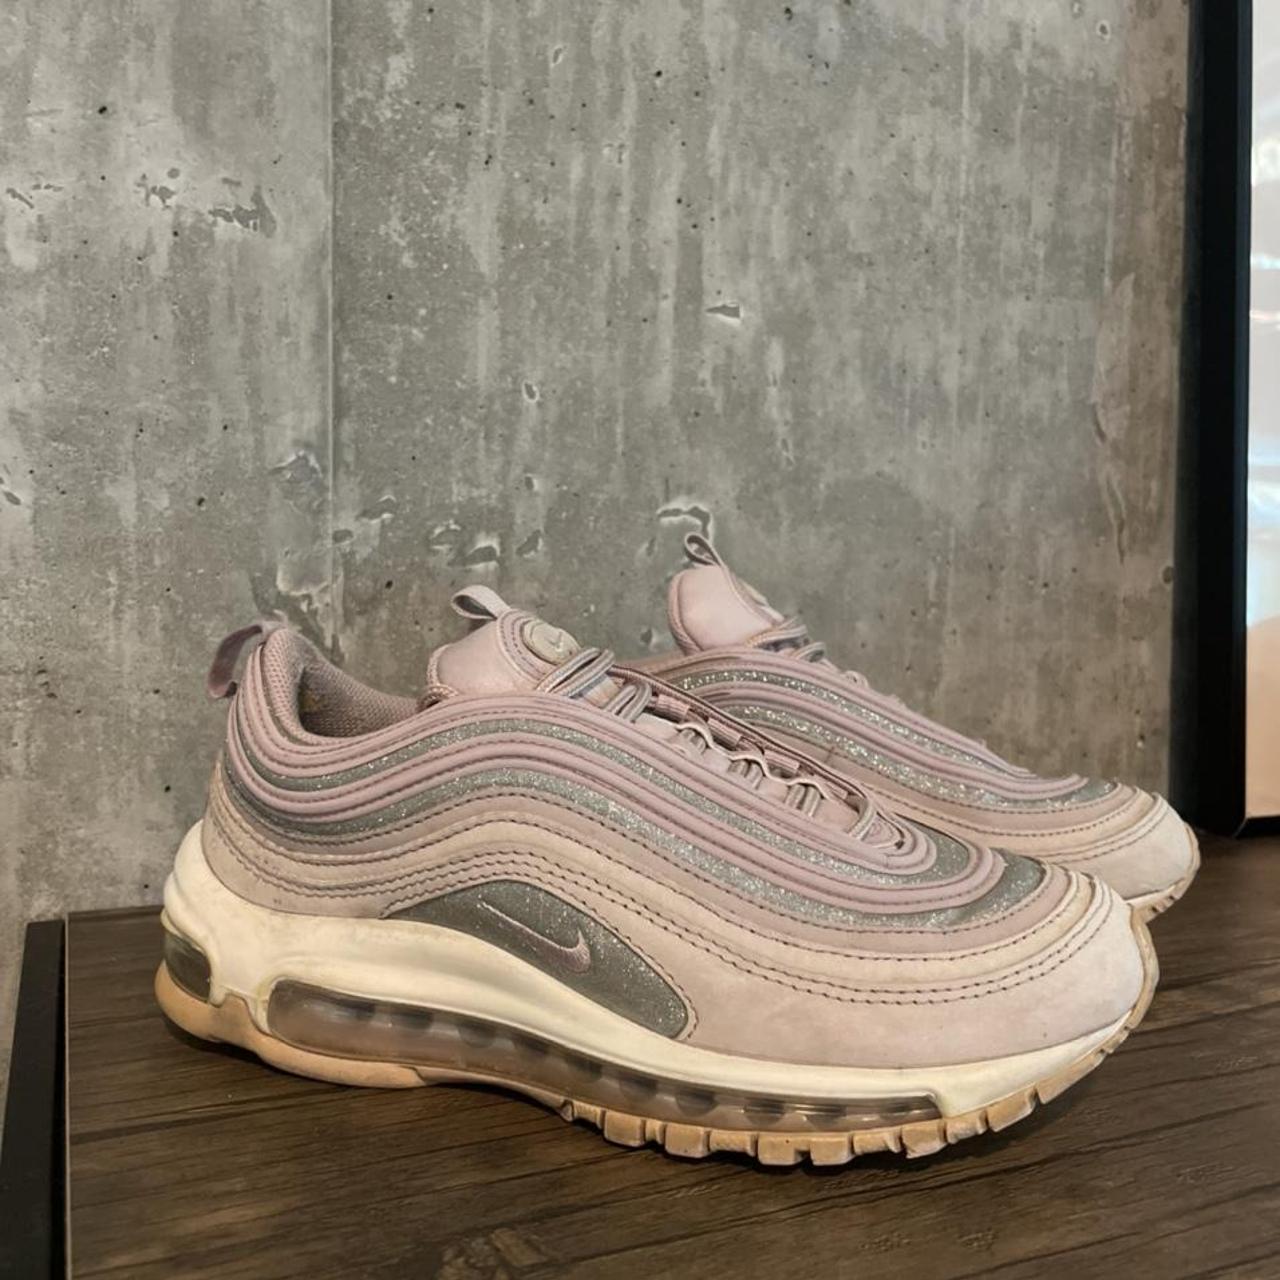 Nike air max 97 baby pink and silver glitter... - Depop